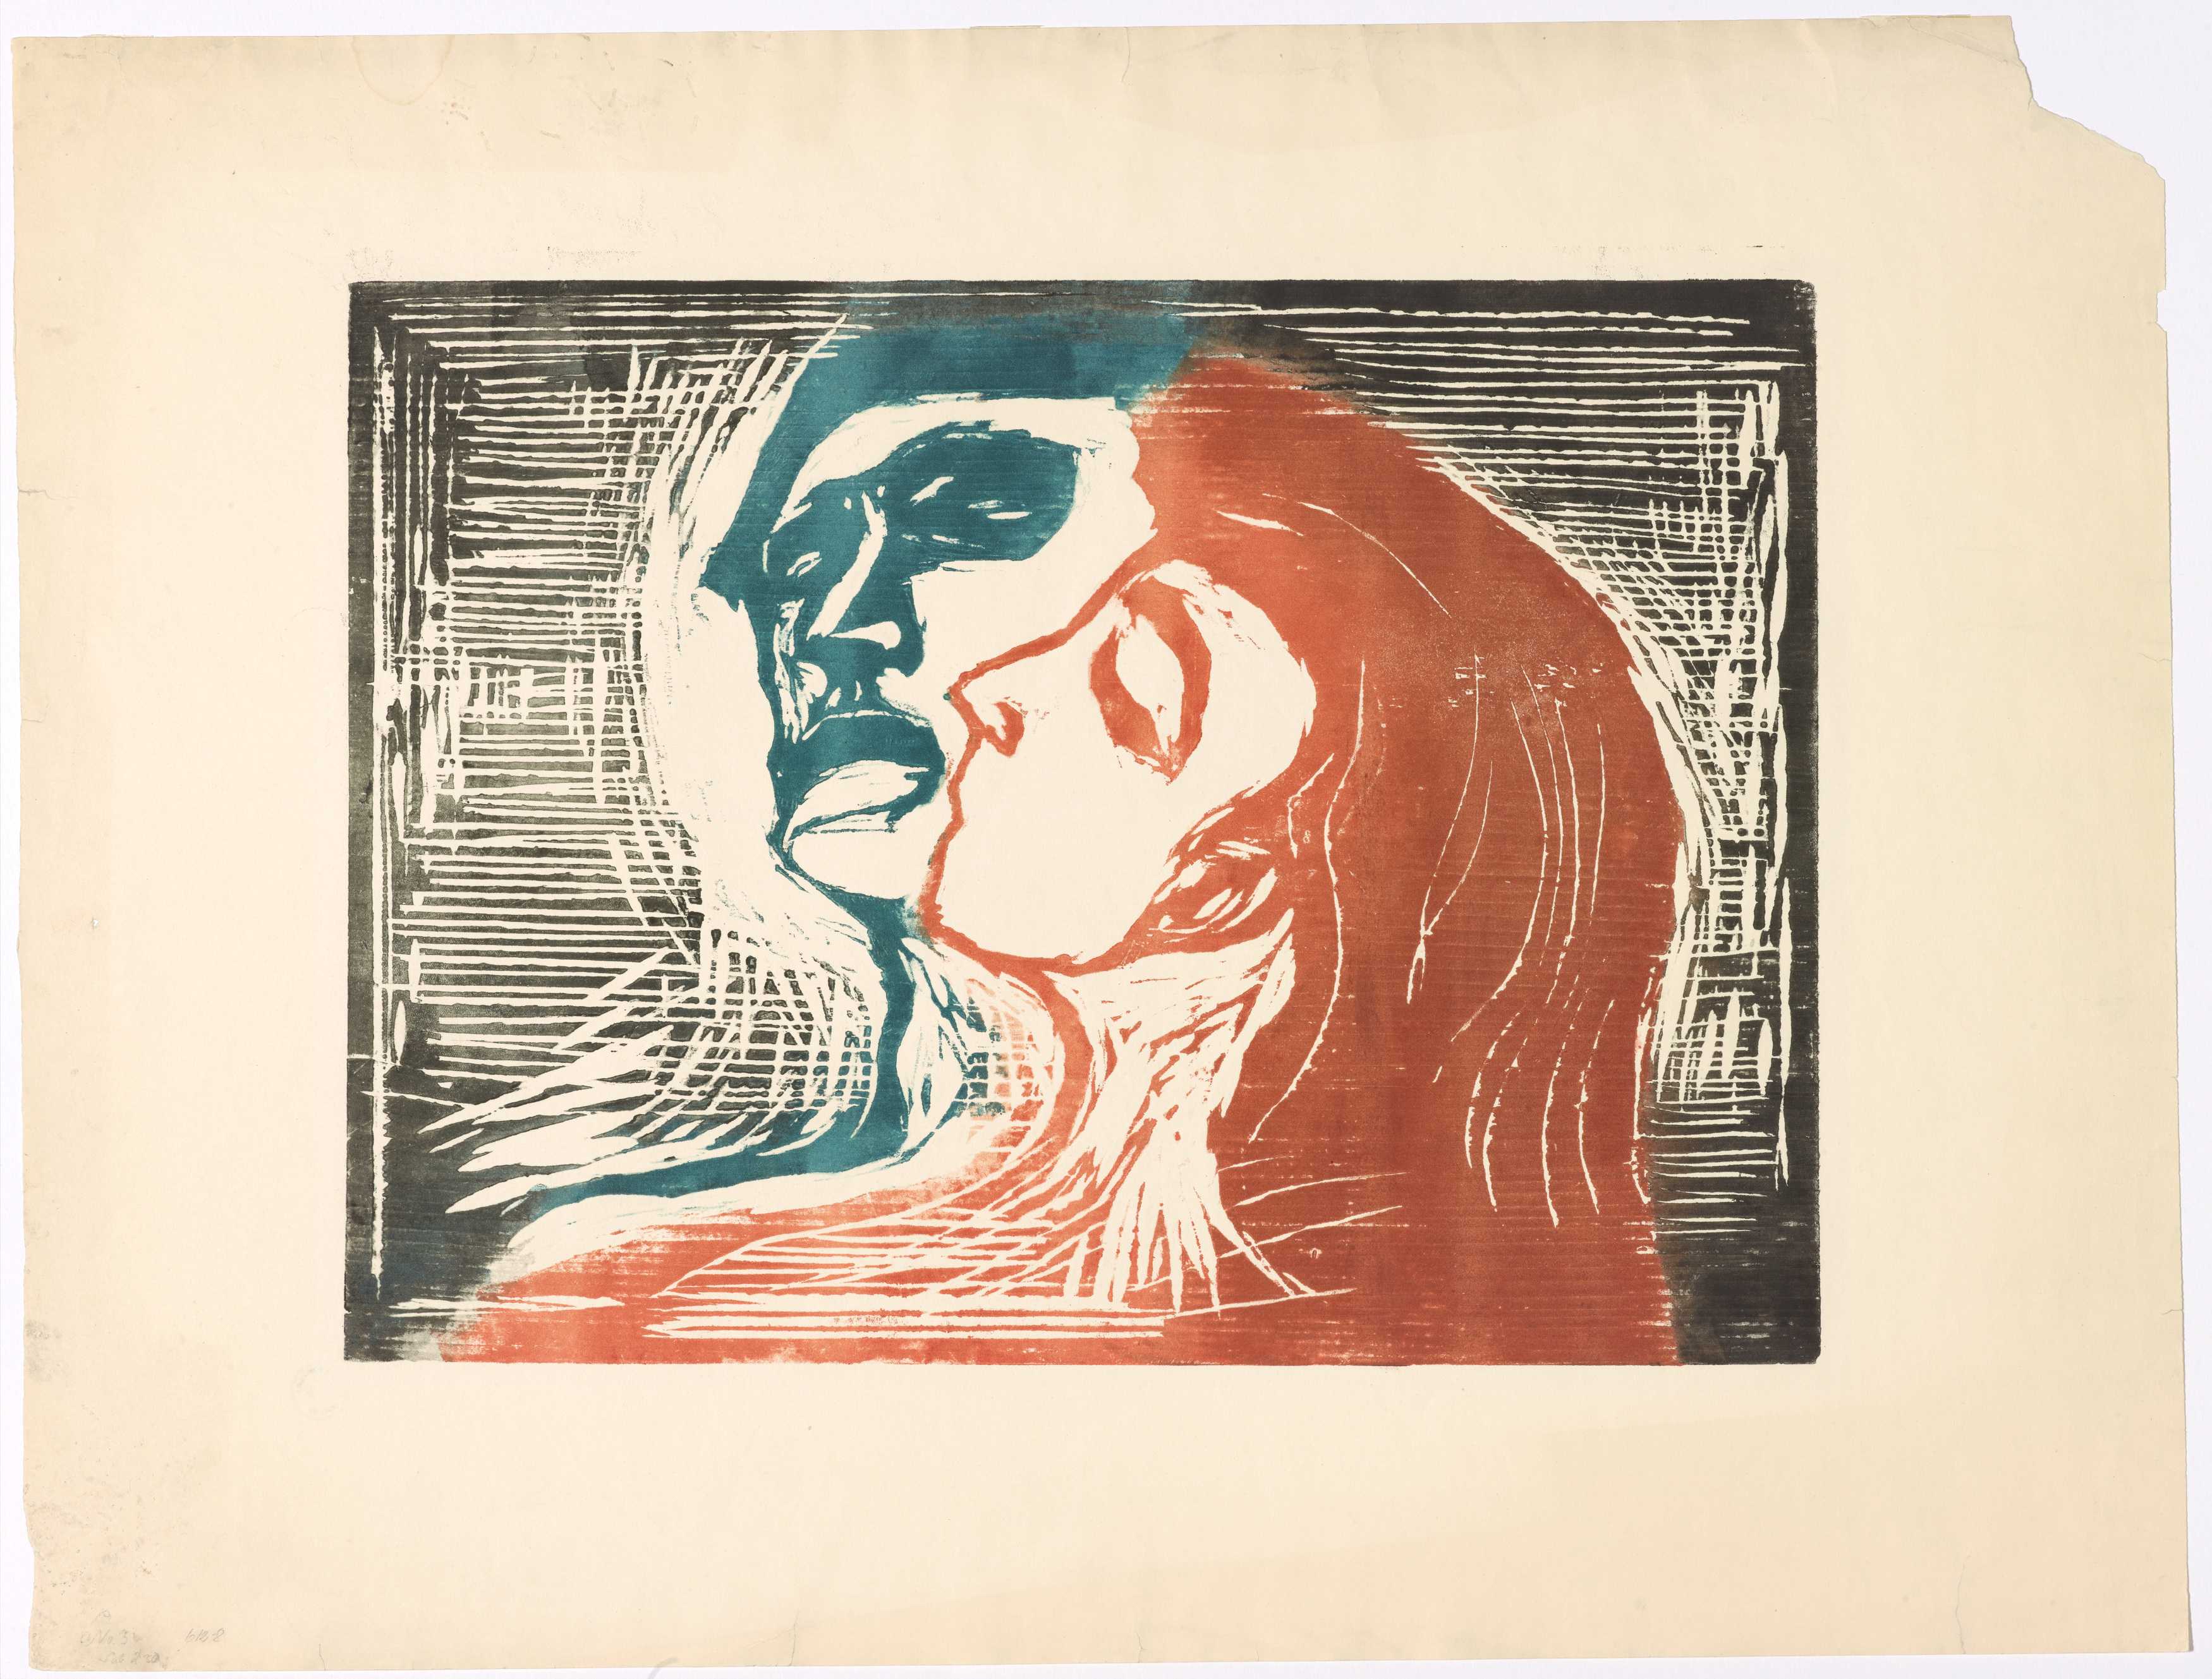 Edvard Munch: Love and Angst, Exhibition, British Museum, London: 11 April 2019 - 21 July 2019